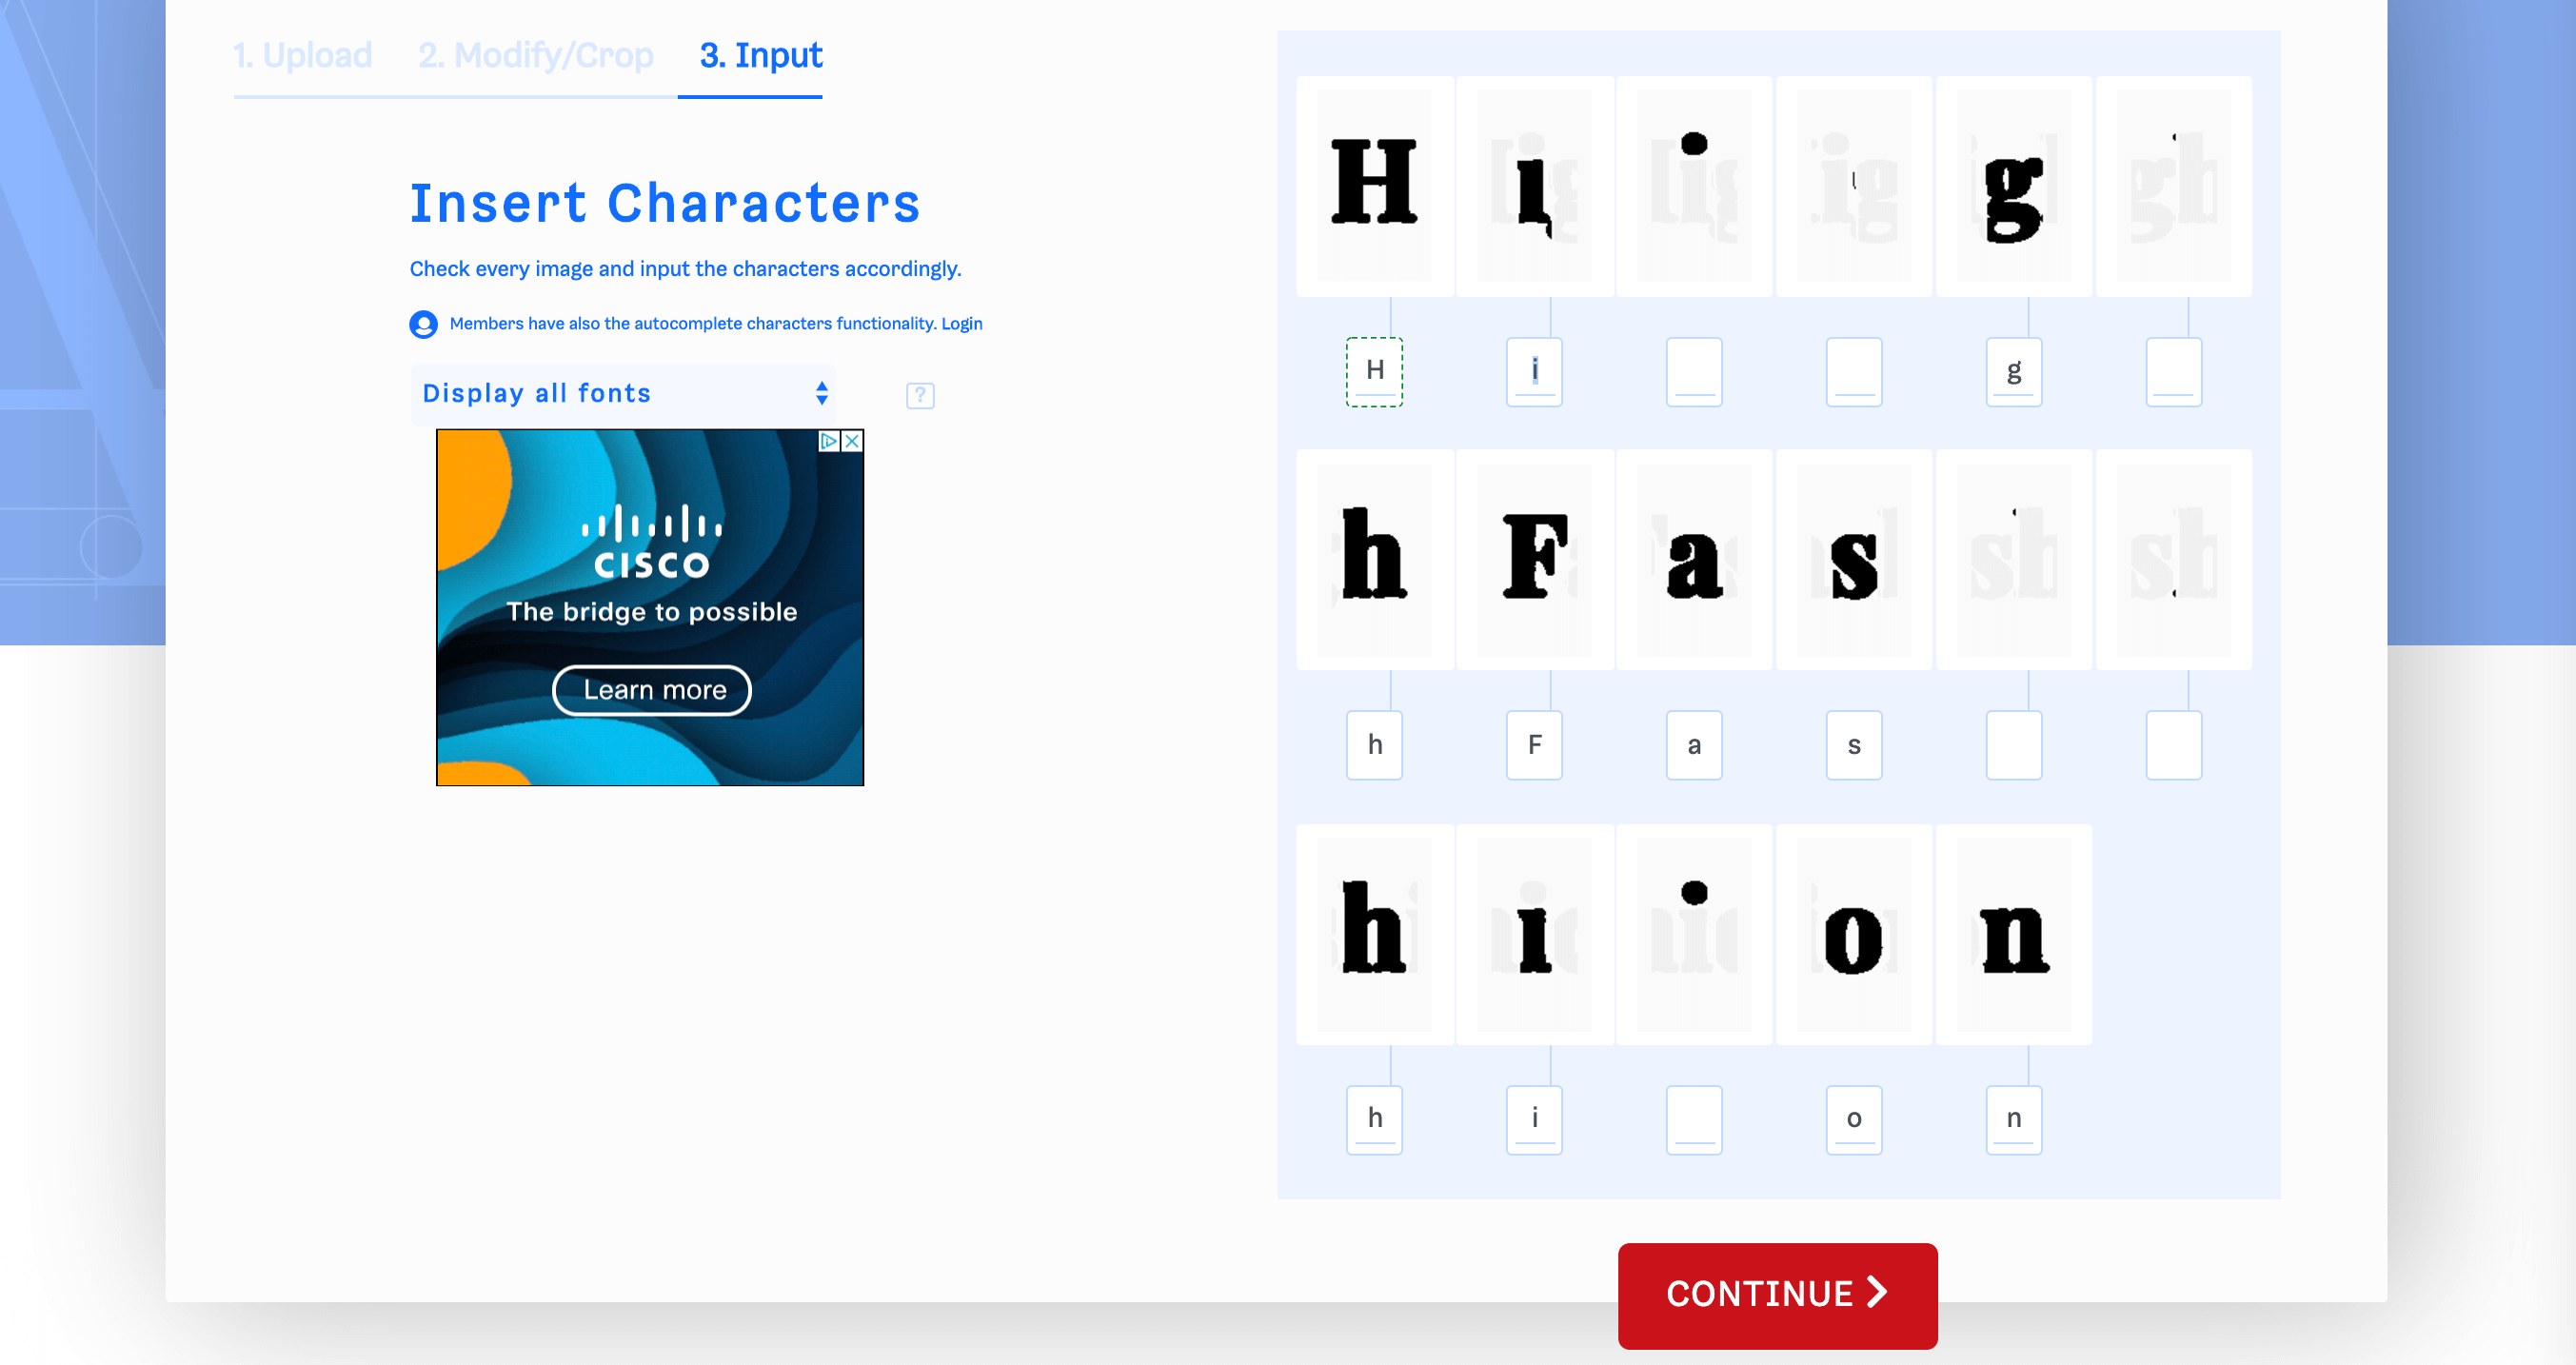 How to find the font used on a website with WhatFont - Quora